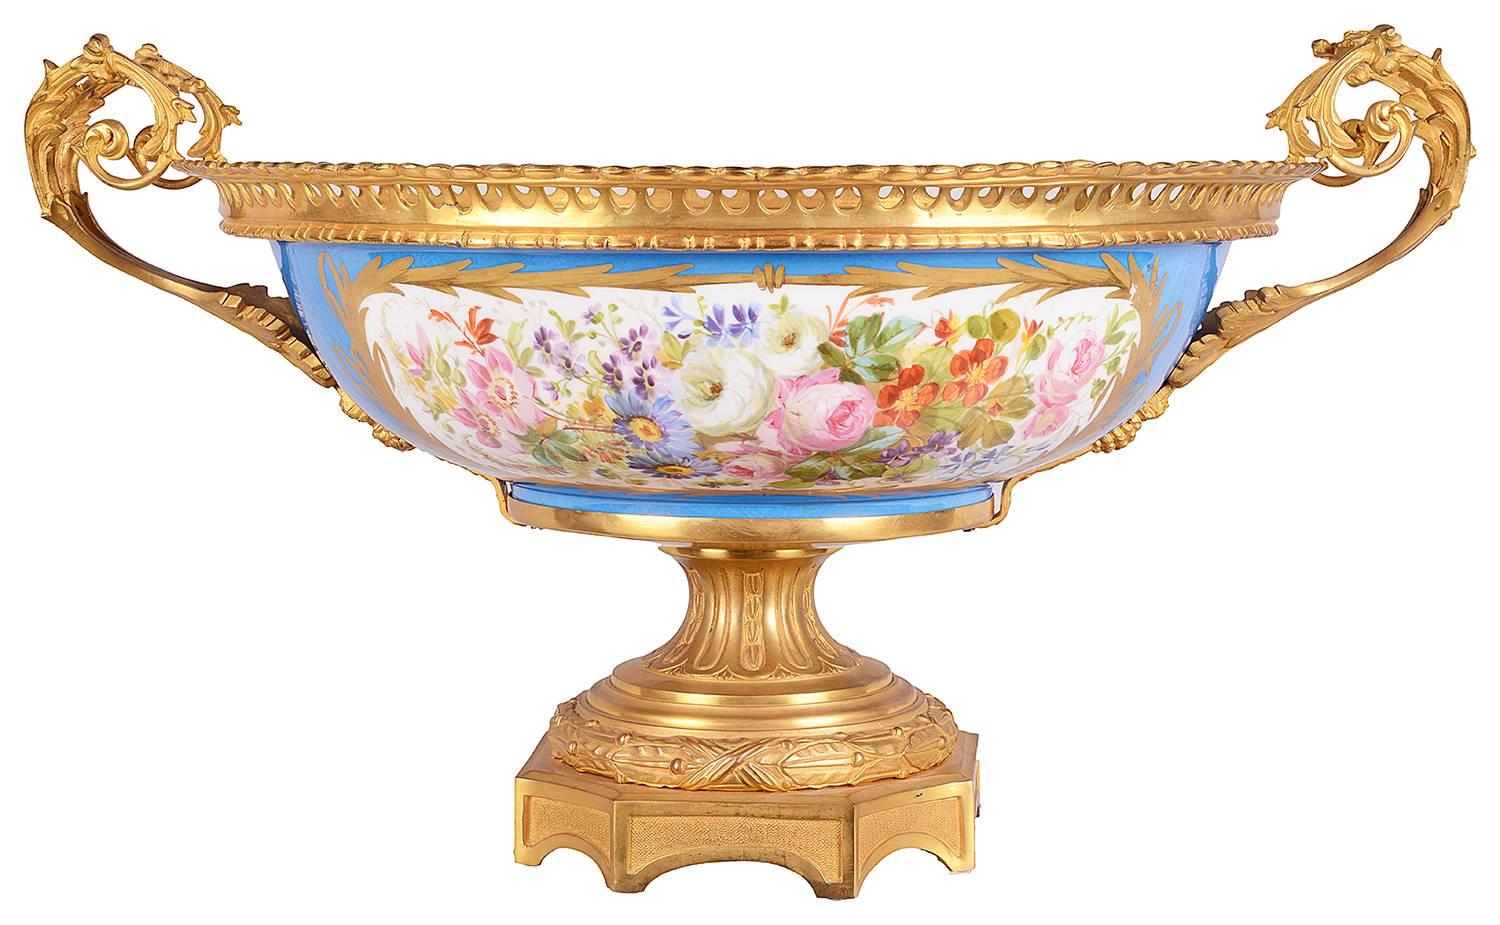 A good quality 19th century French Sevres style gilded ormolu-mounted comport. Having a classical romantic scene to the central panel, with a light blue coloured ground, gilded decoration, a floral scene to the reverse. Scrolling gilded foliate